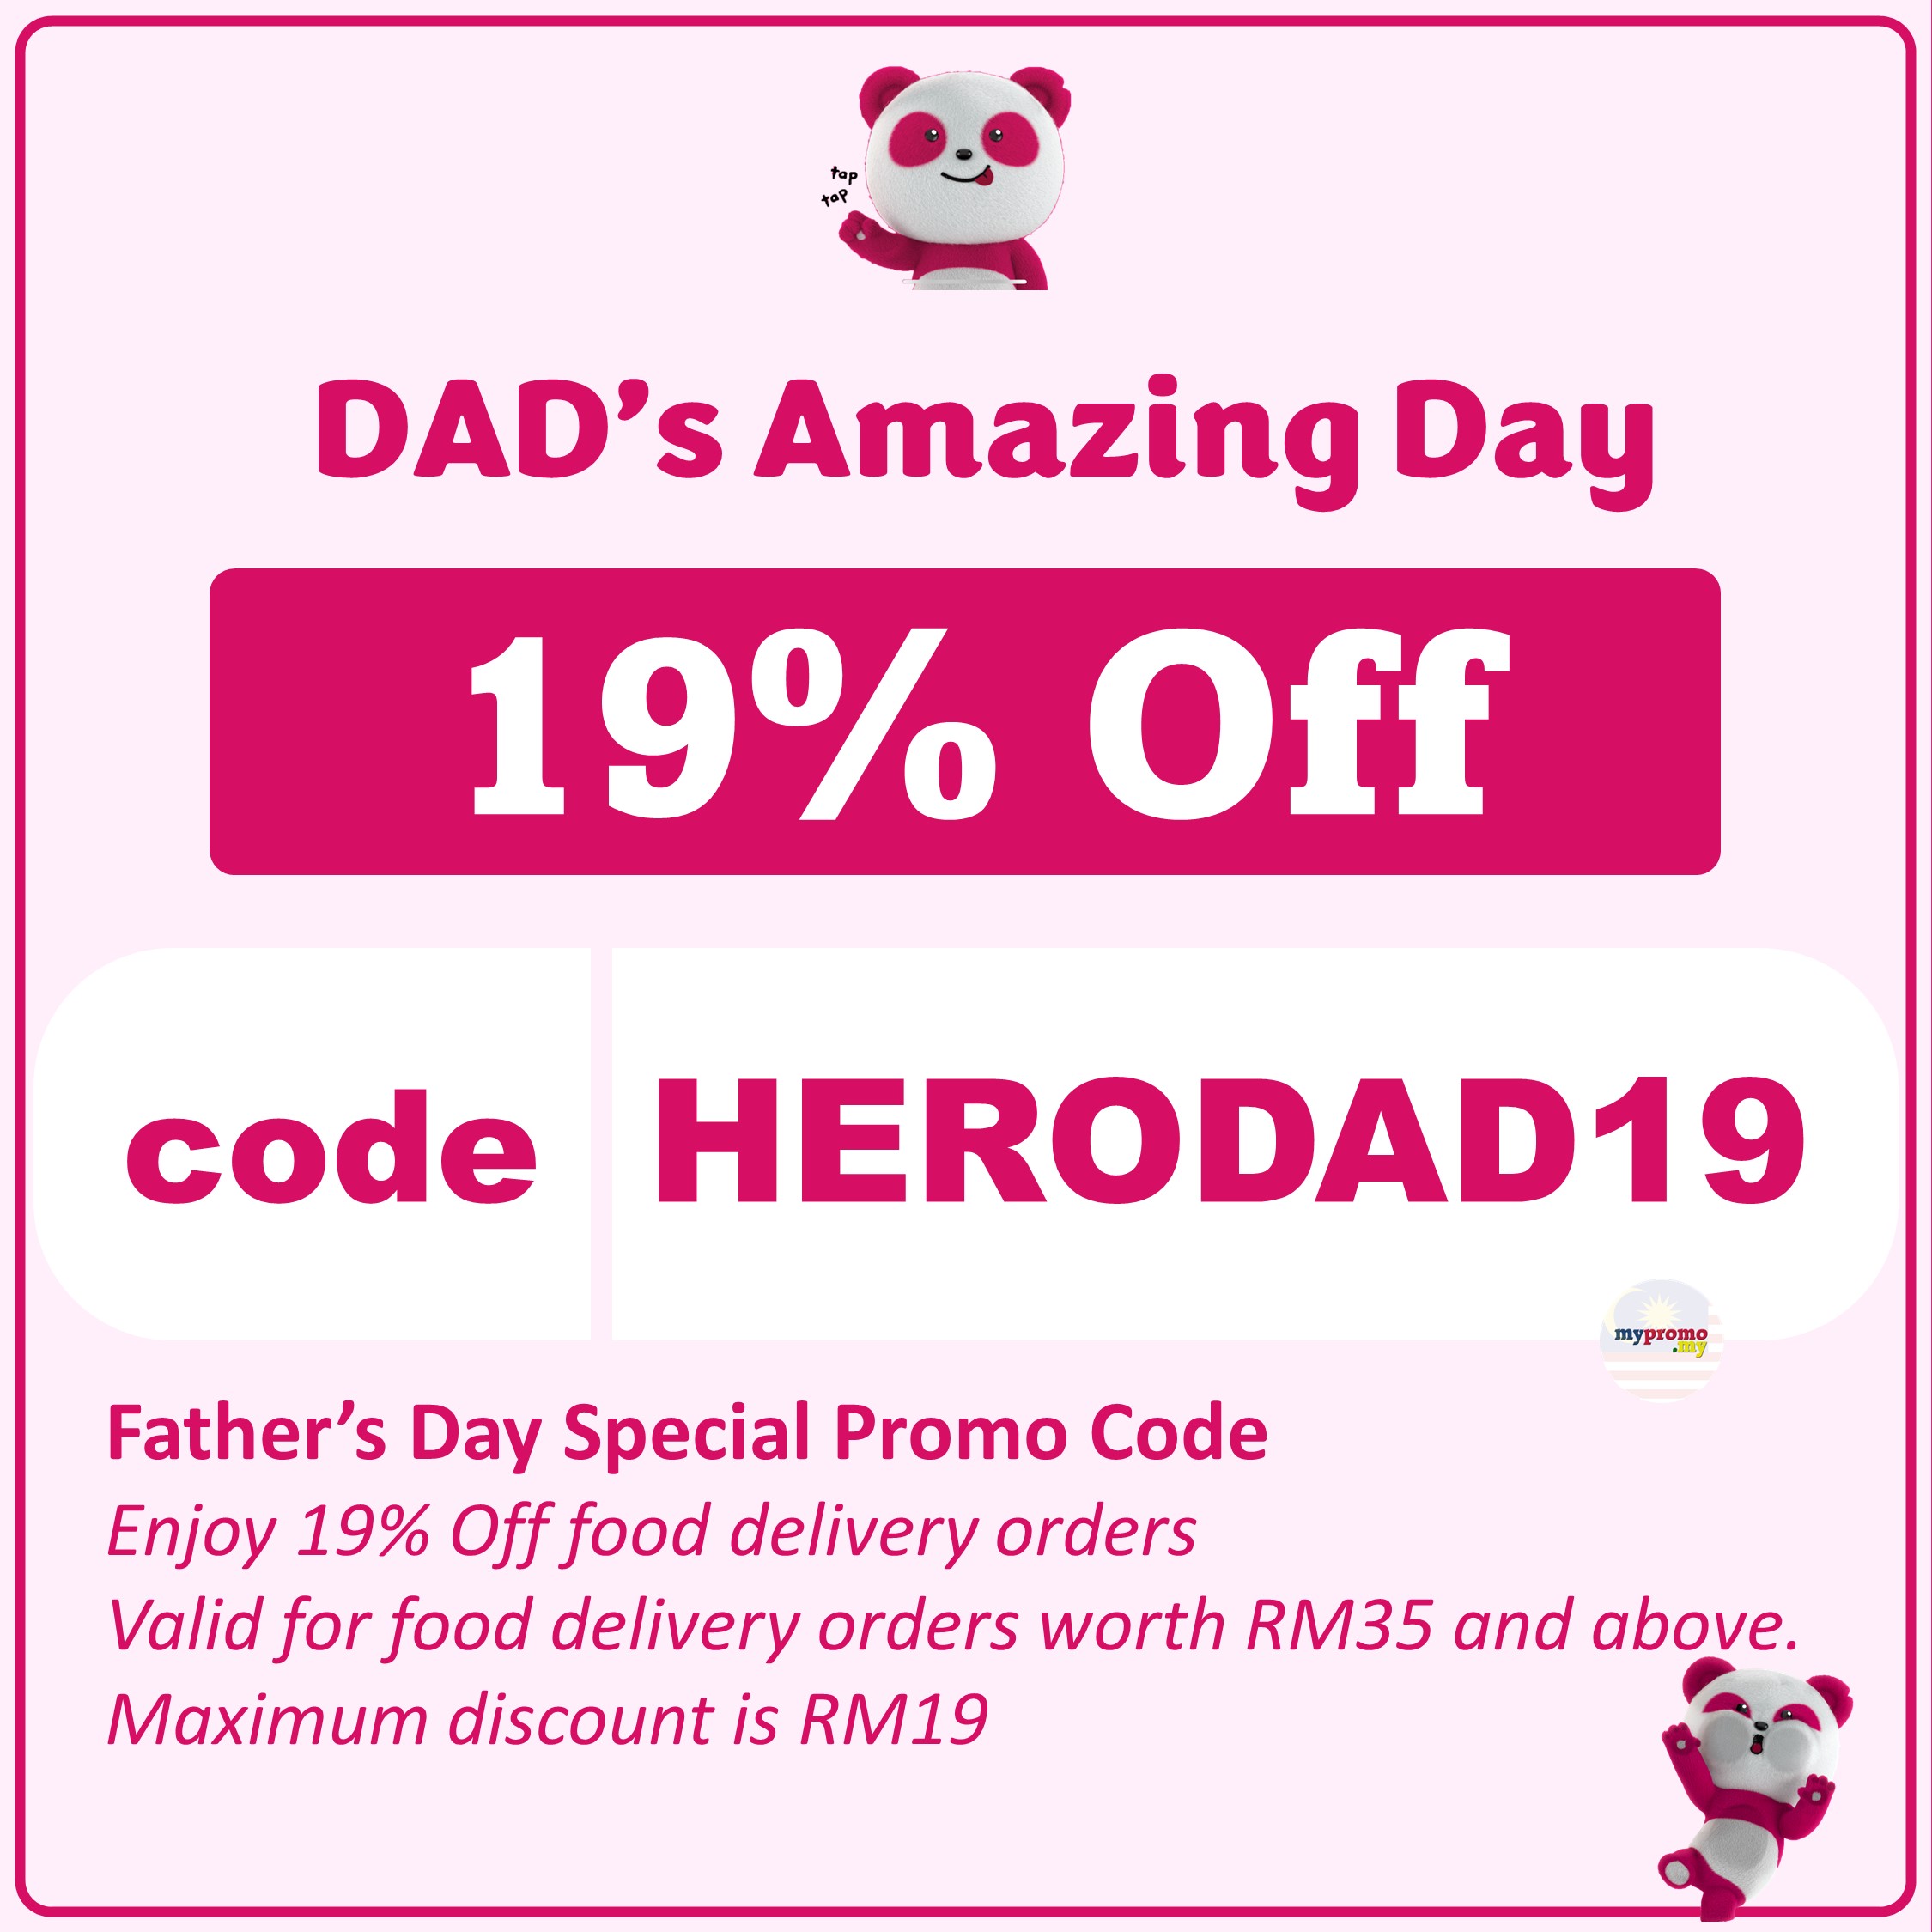 foodpanda - Father's Day Voucher Code